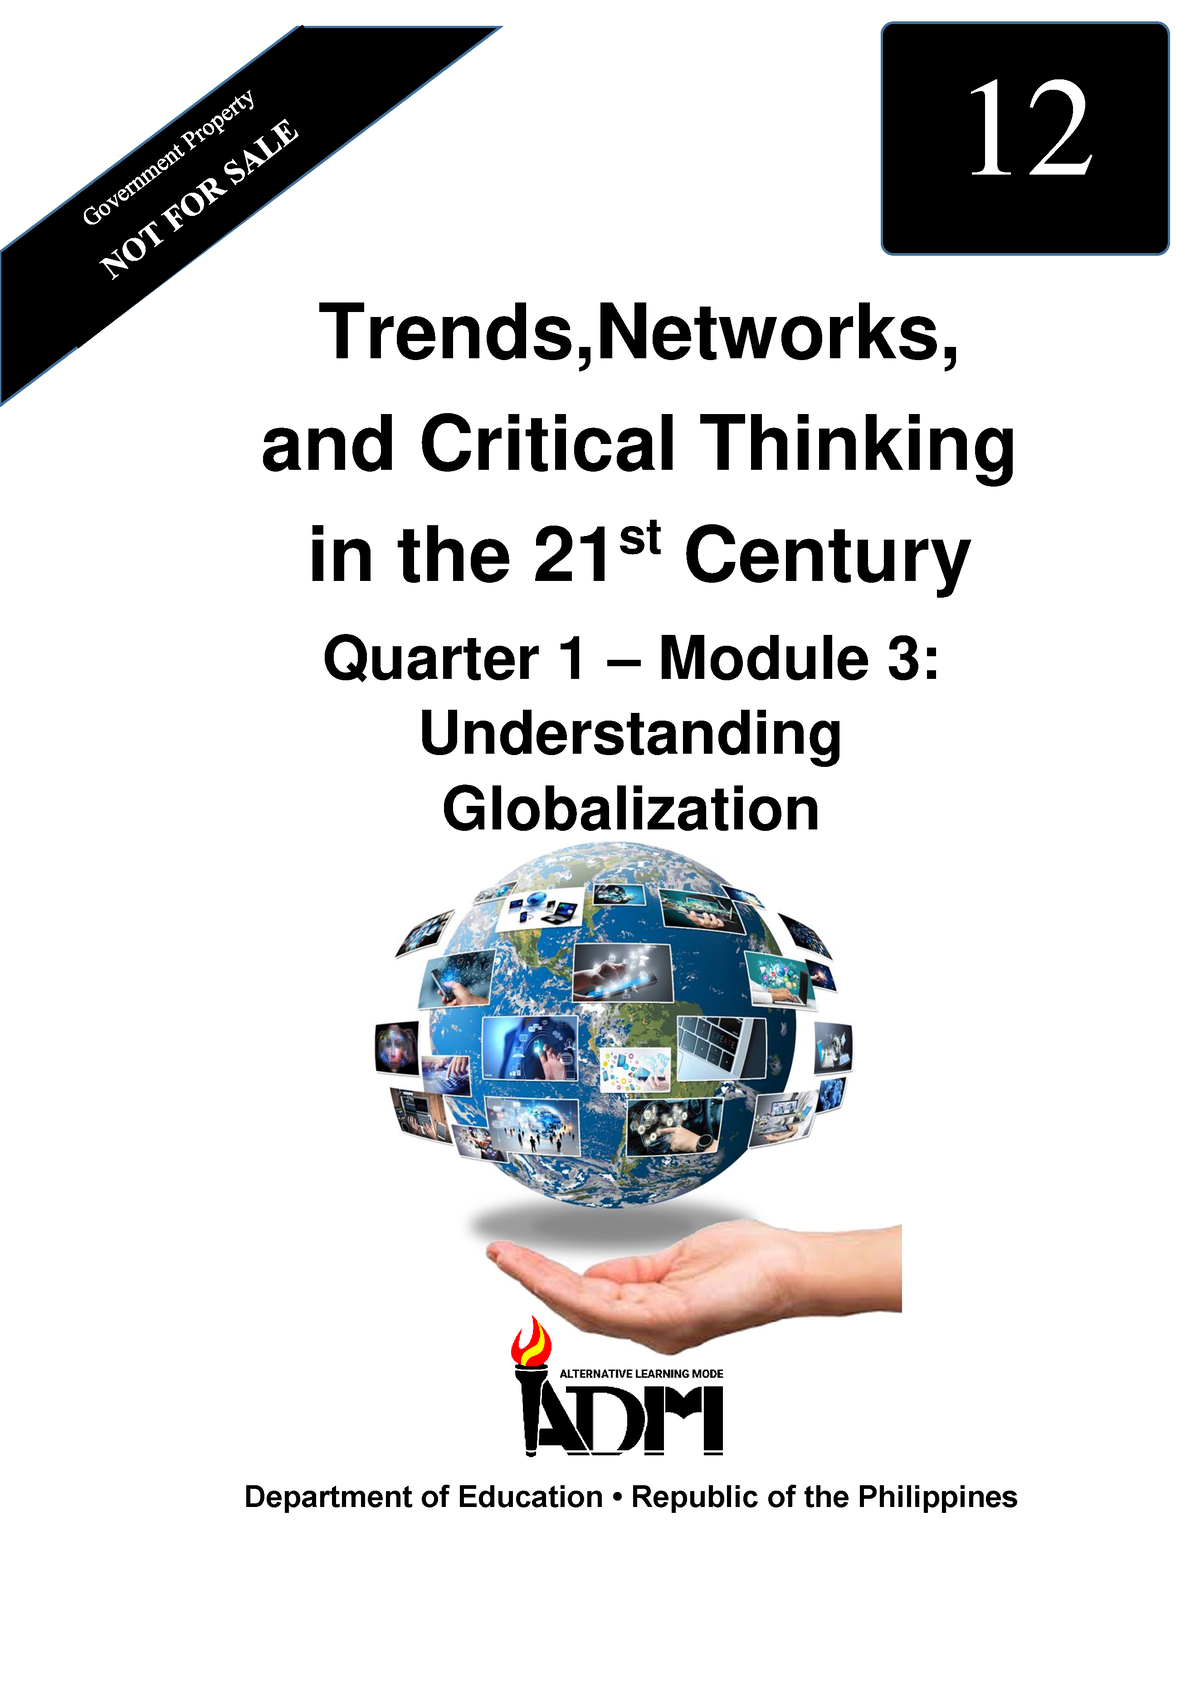 trends network and critical thinking in 21st century culture